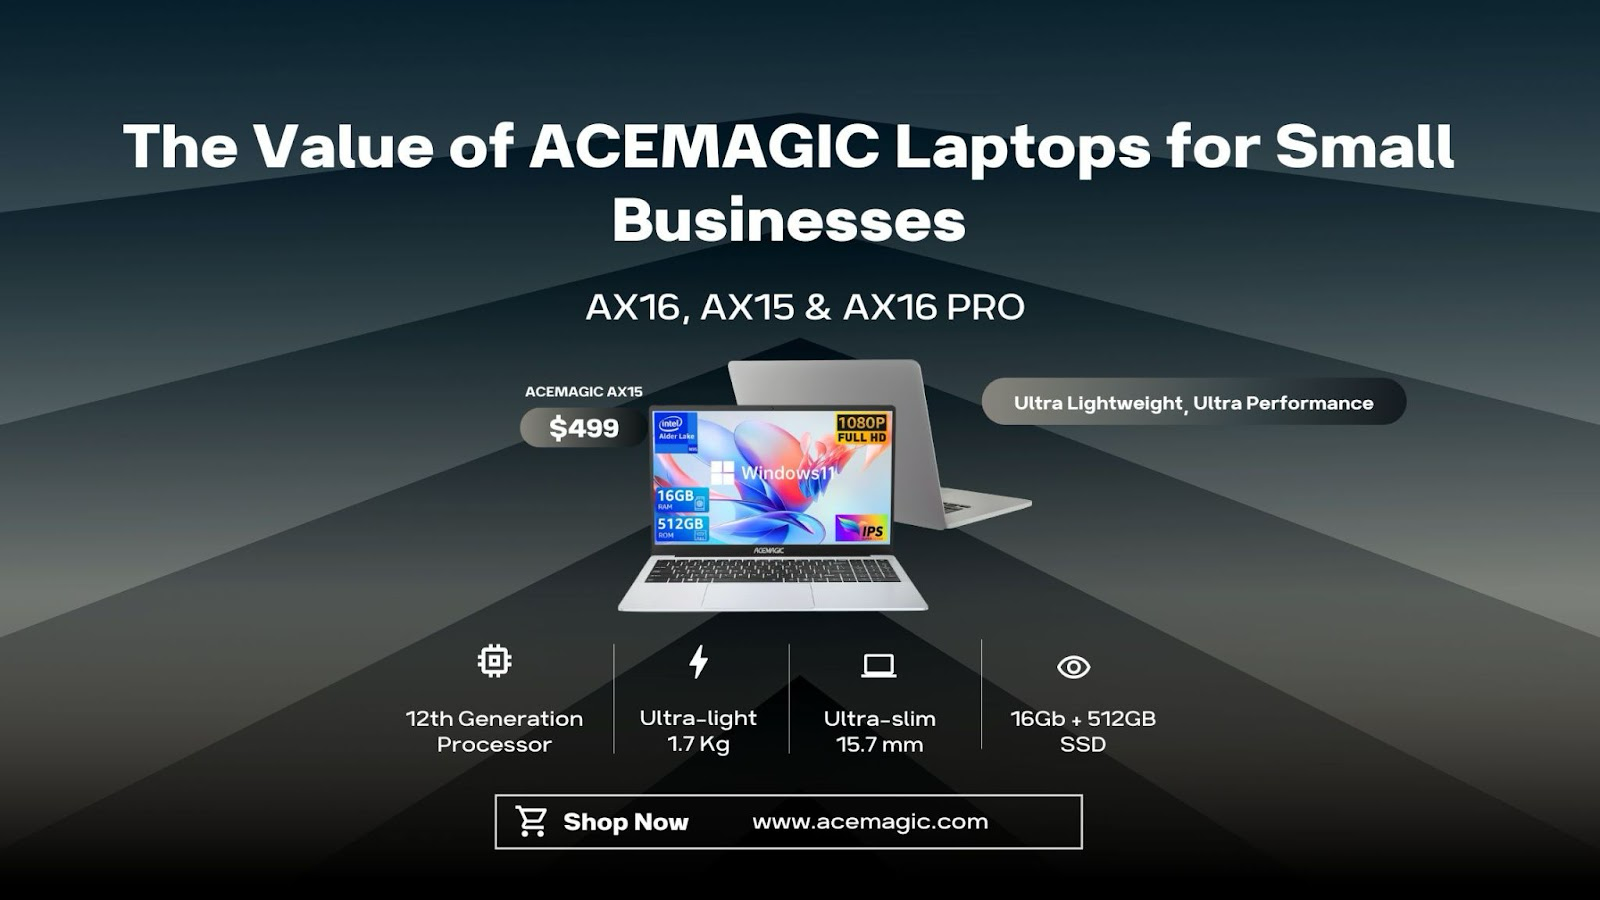 The Value of ACEMAGIC Laptops for Small Businesses